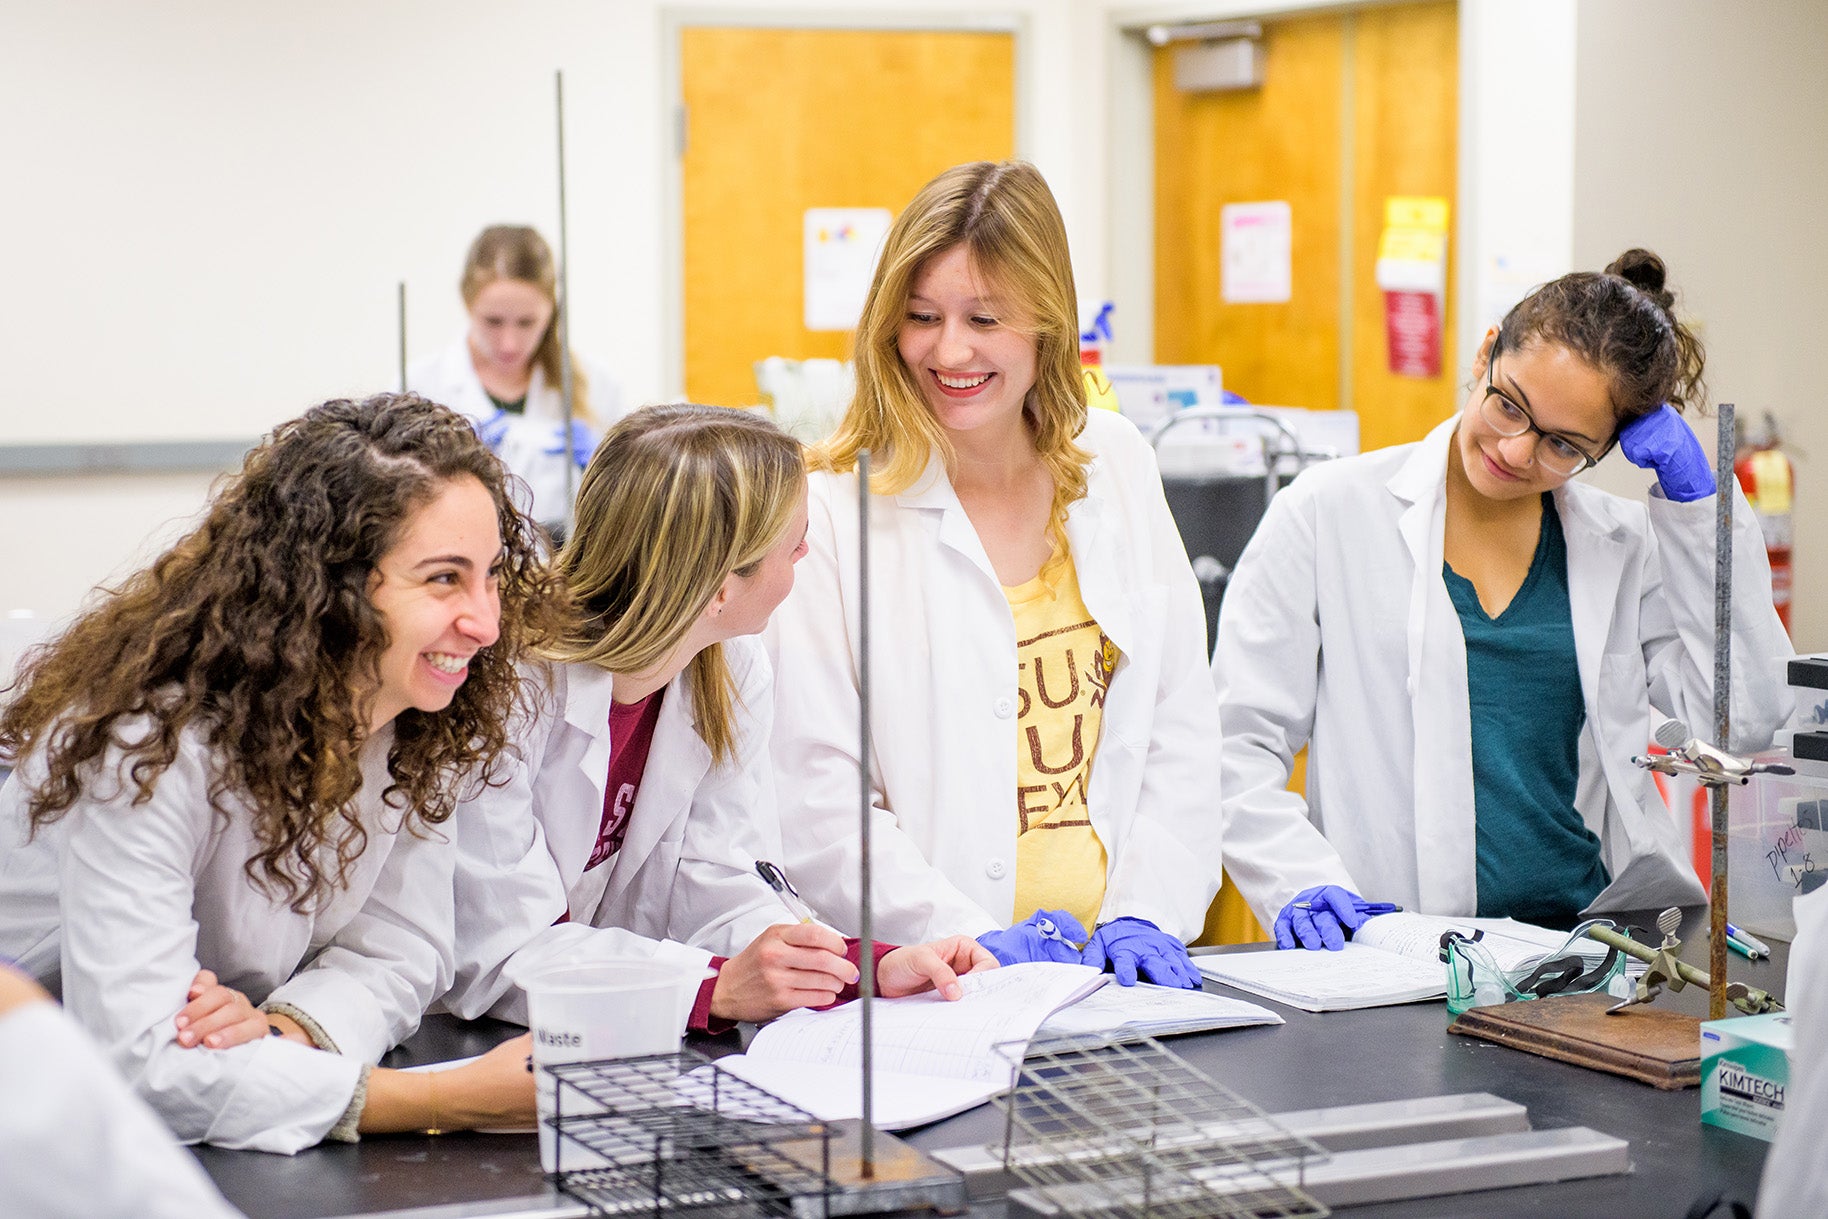 4 students in a lab setting wearing lab coats and laughing with each other.